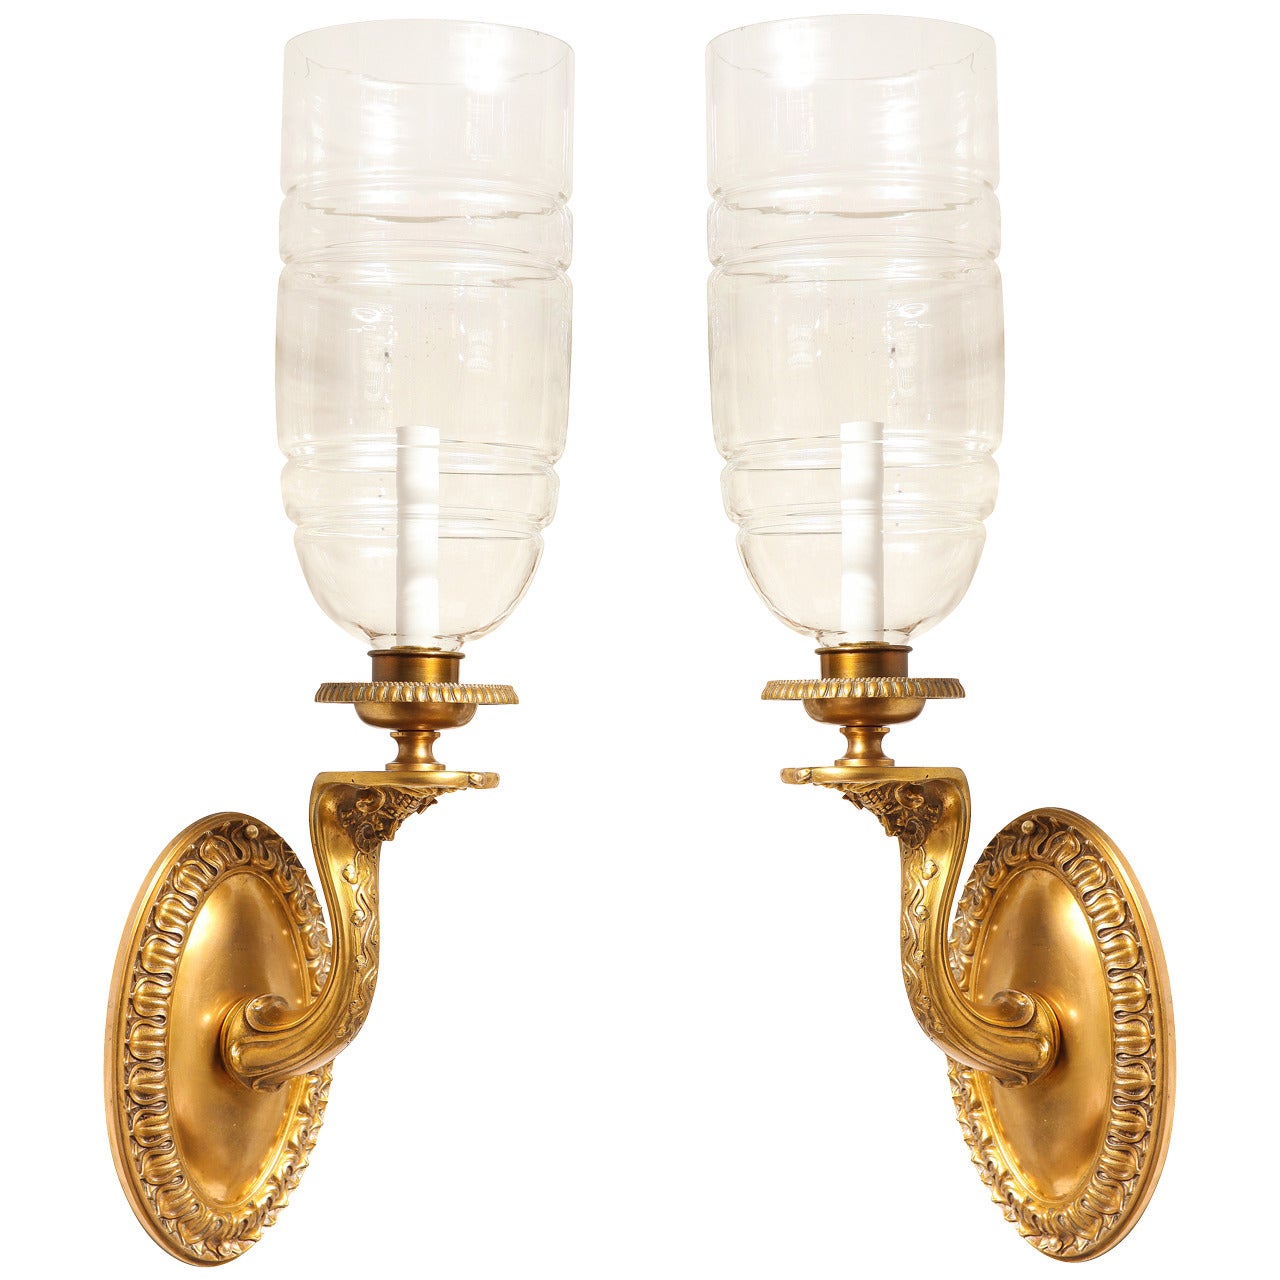 A Pair of Signed Neo-Grec Hurricane Wall Sconces by E.F Caldwell 